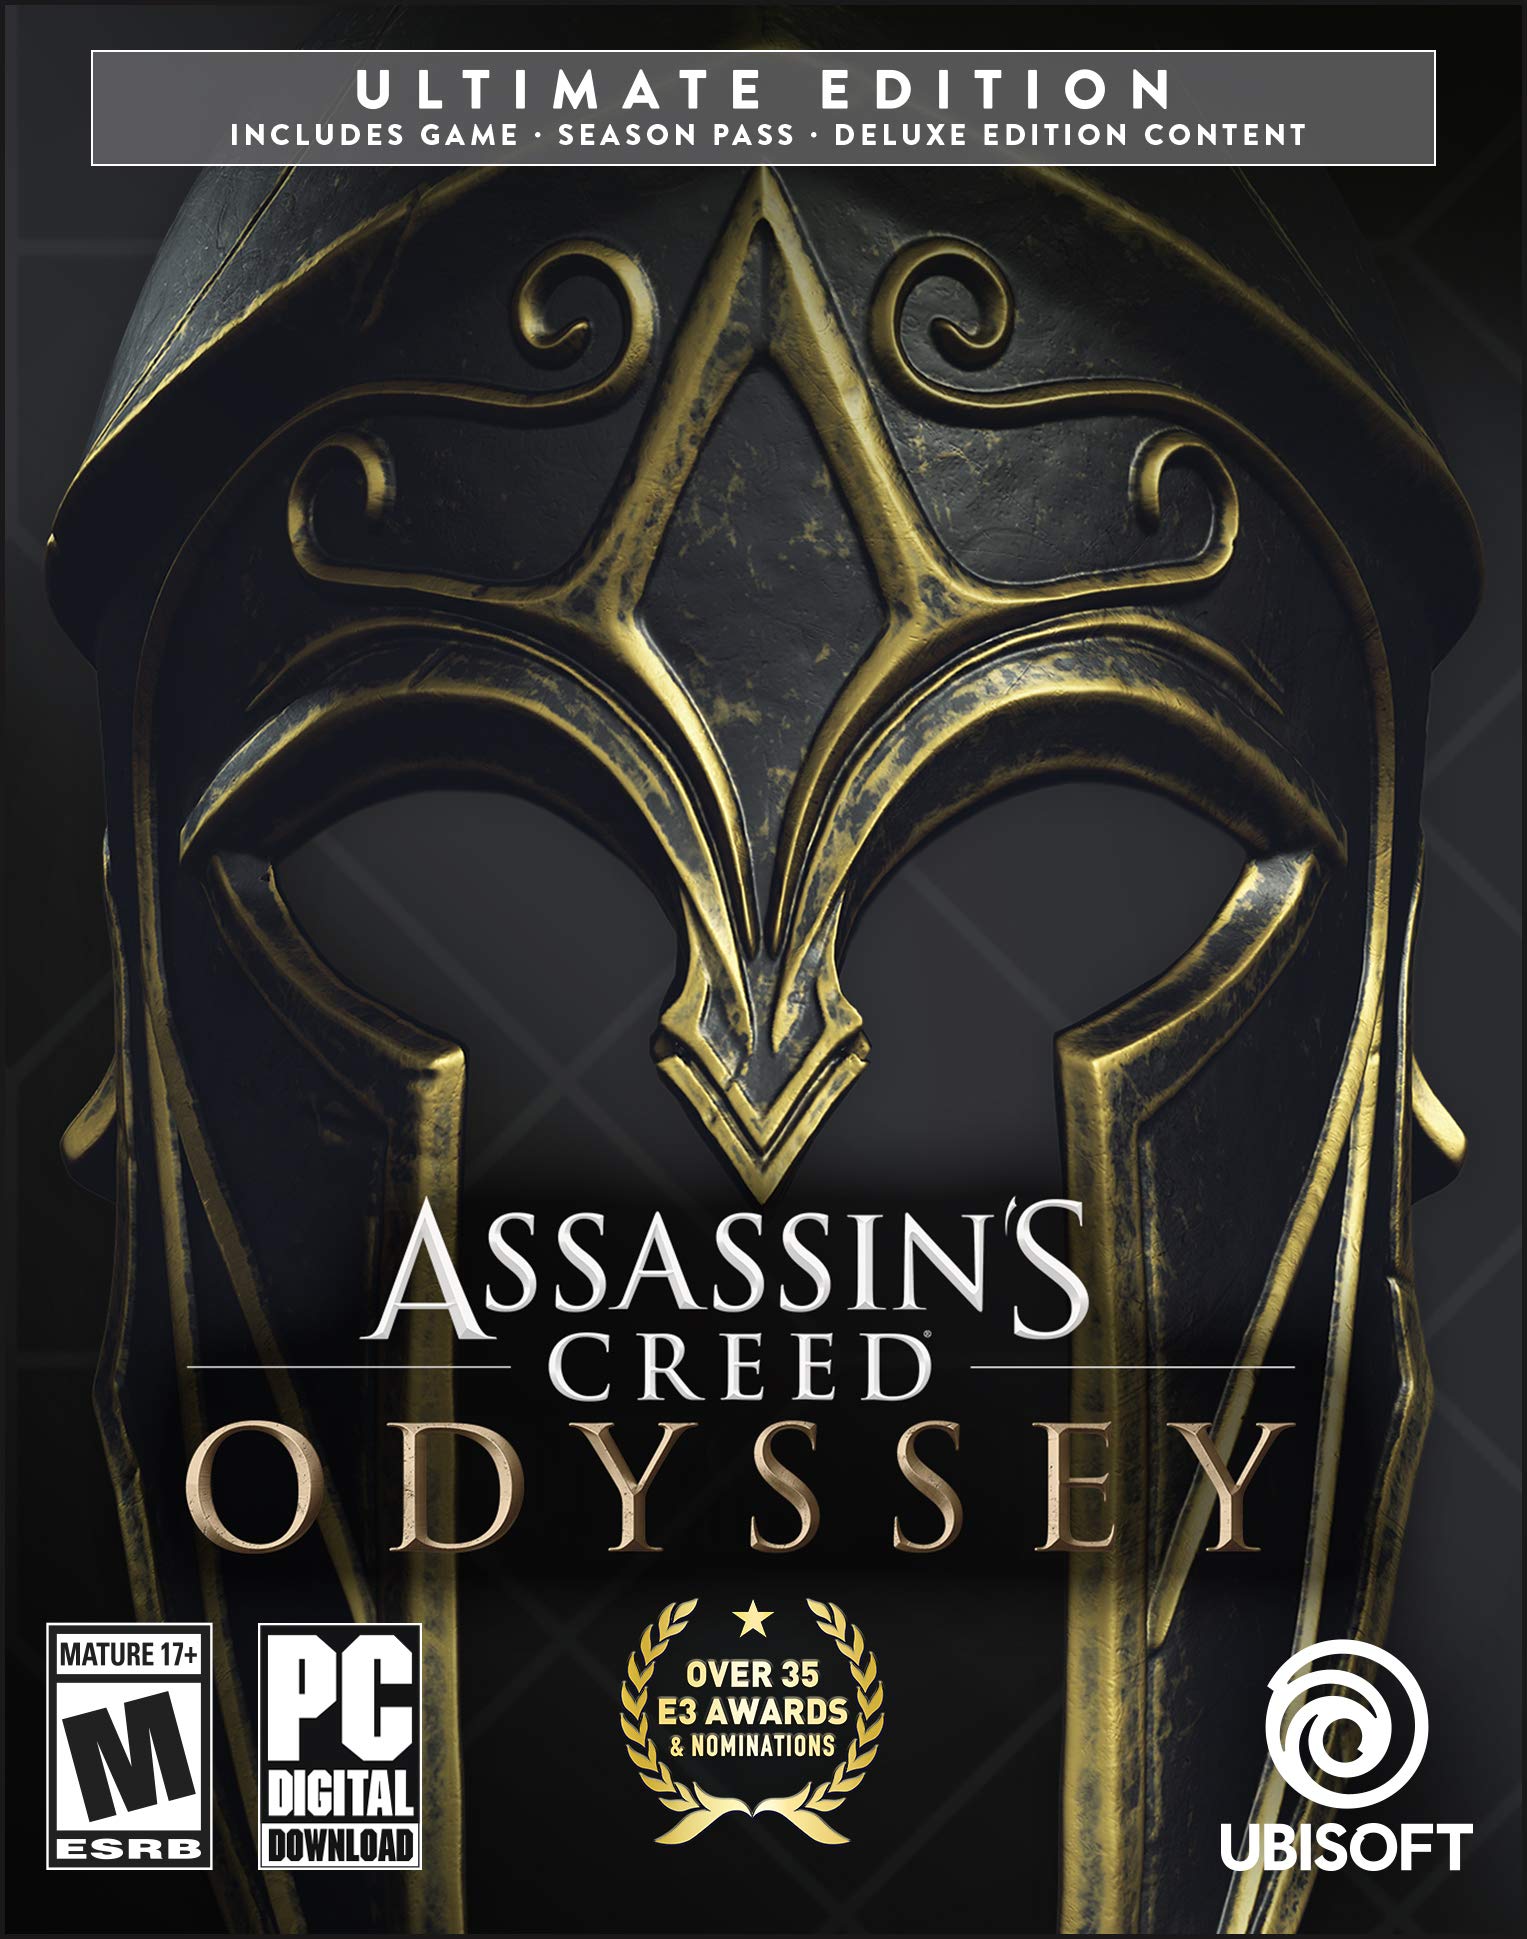 Assassin's Creed Odyssey - Ultimate Edition | PC Code - Ubisoft Connect